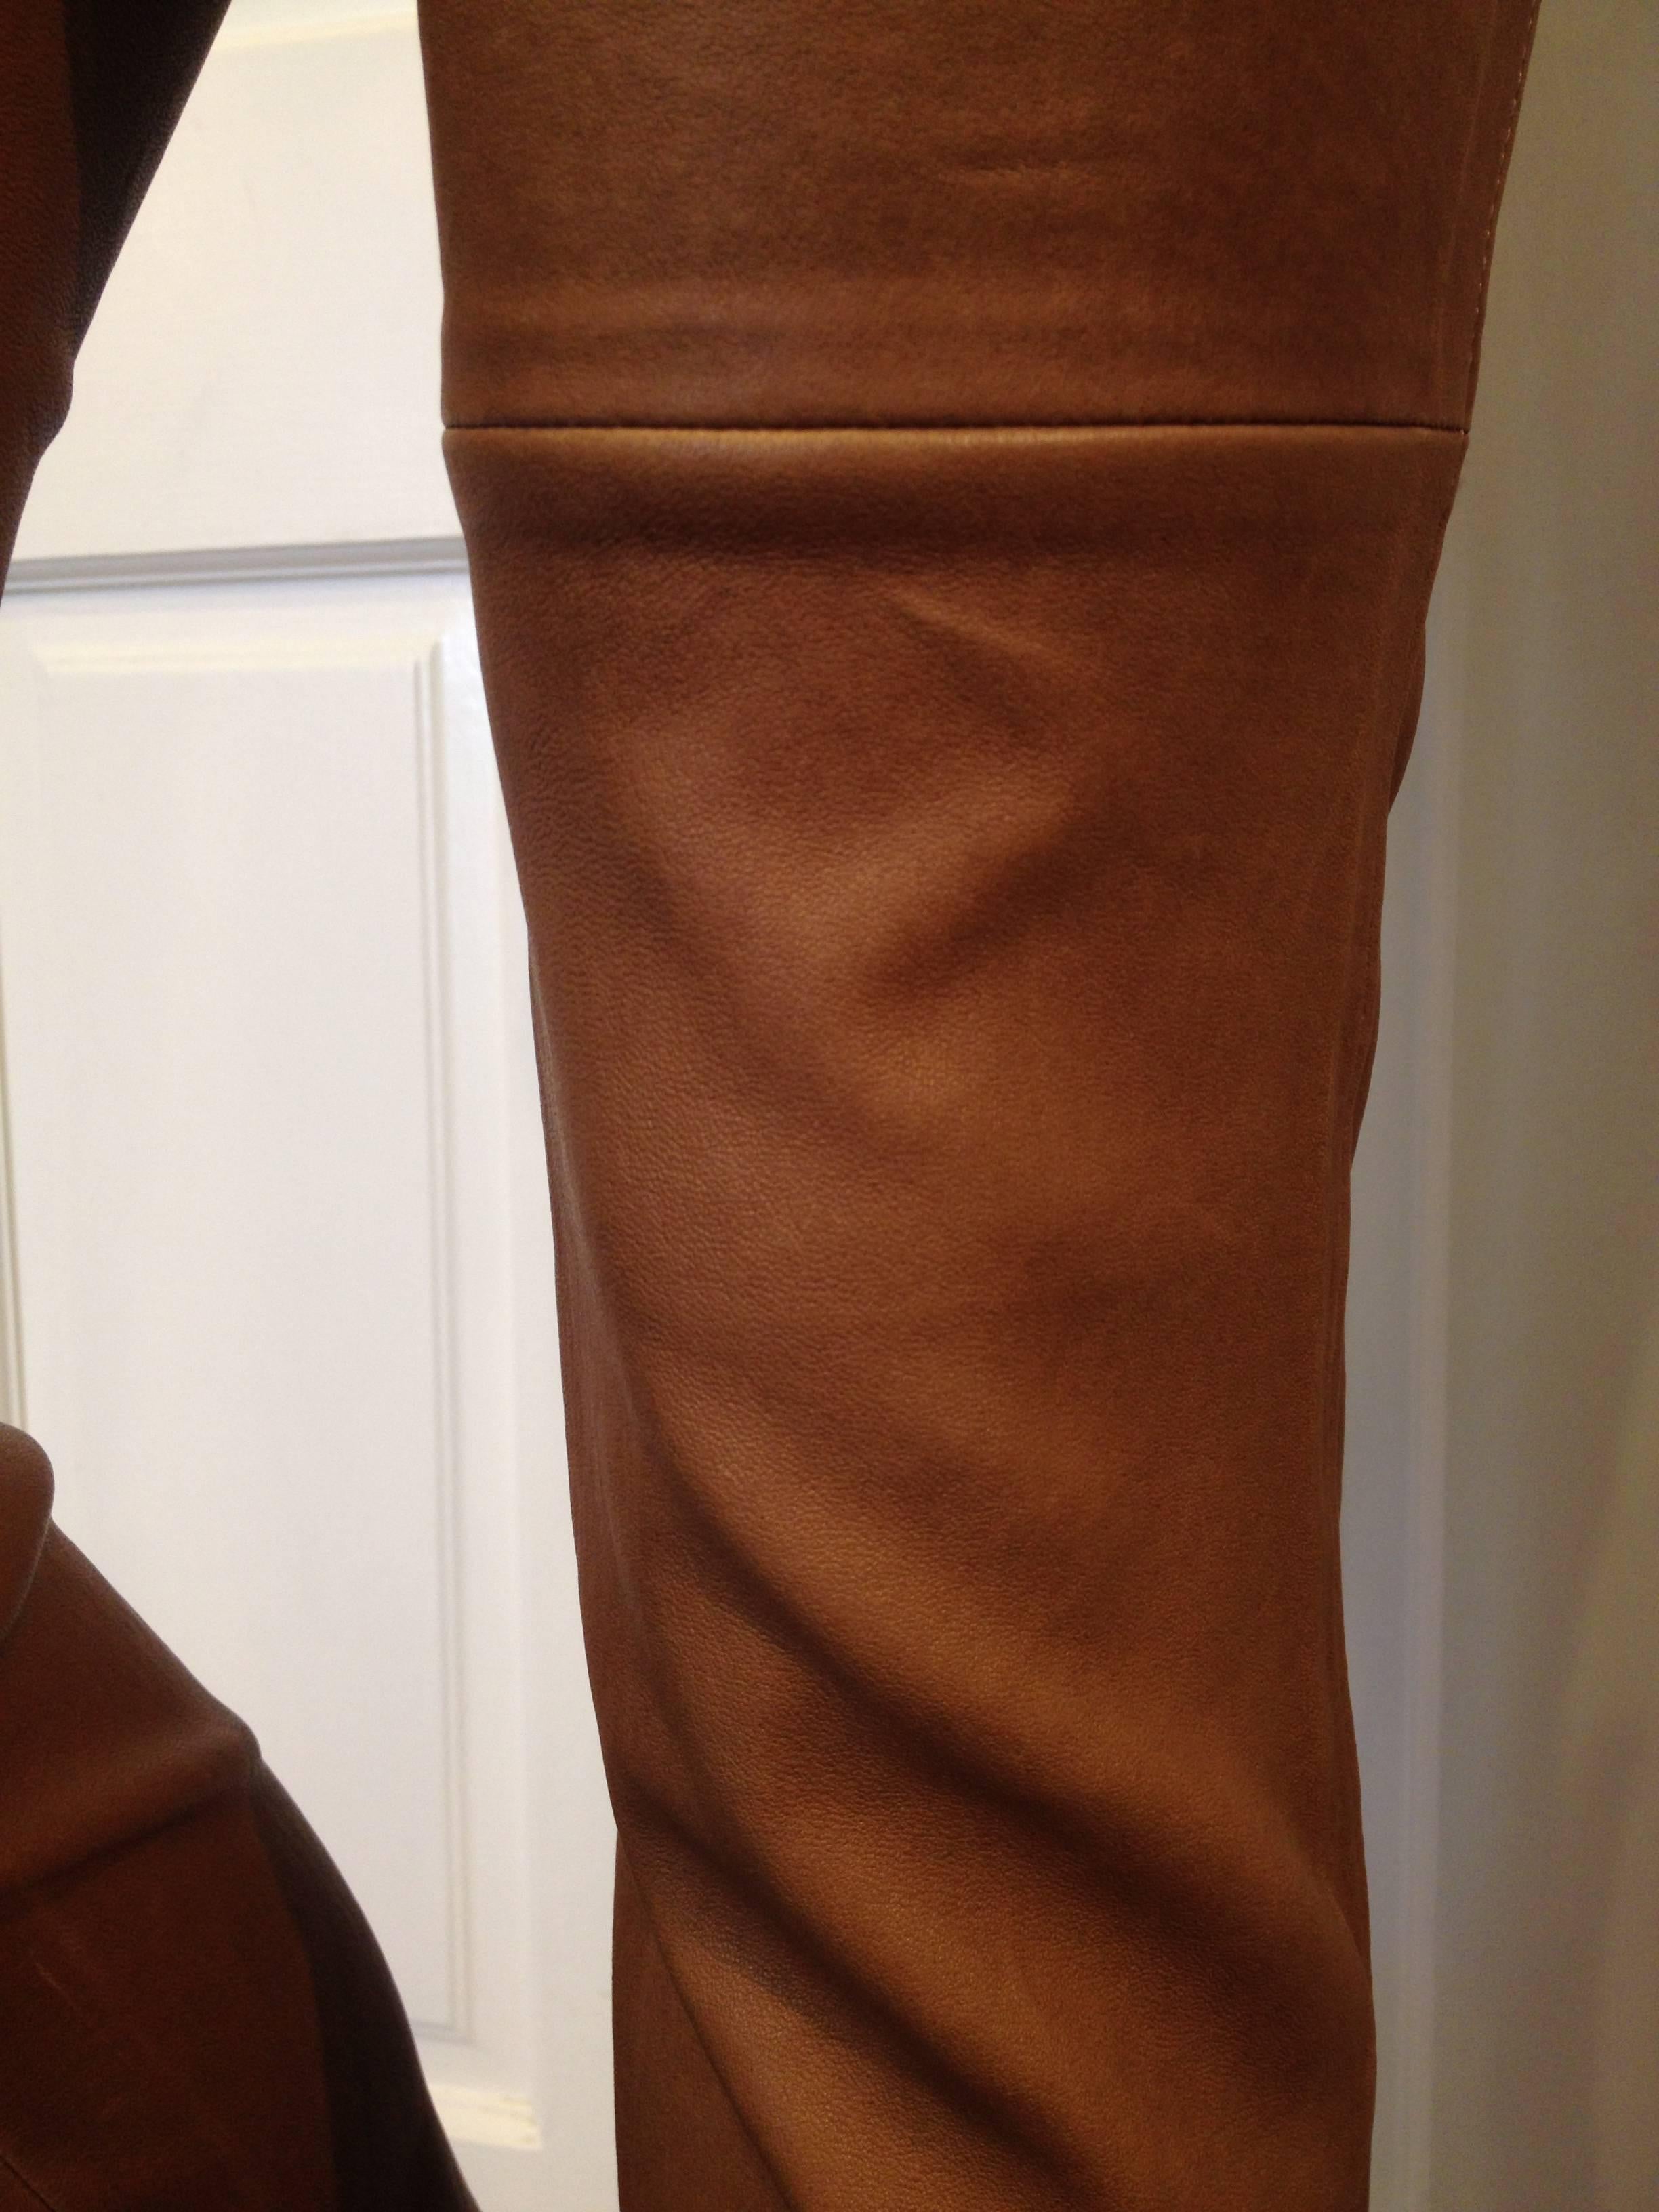 Stouls Caramel Brown Leather Pant Size S 3